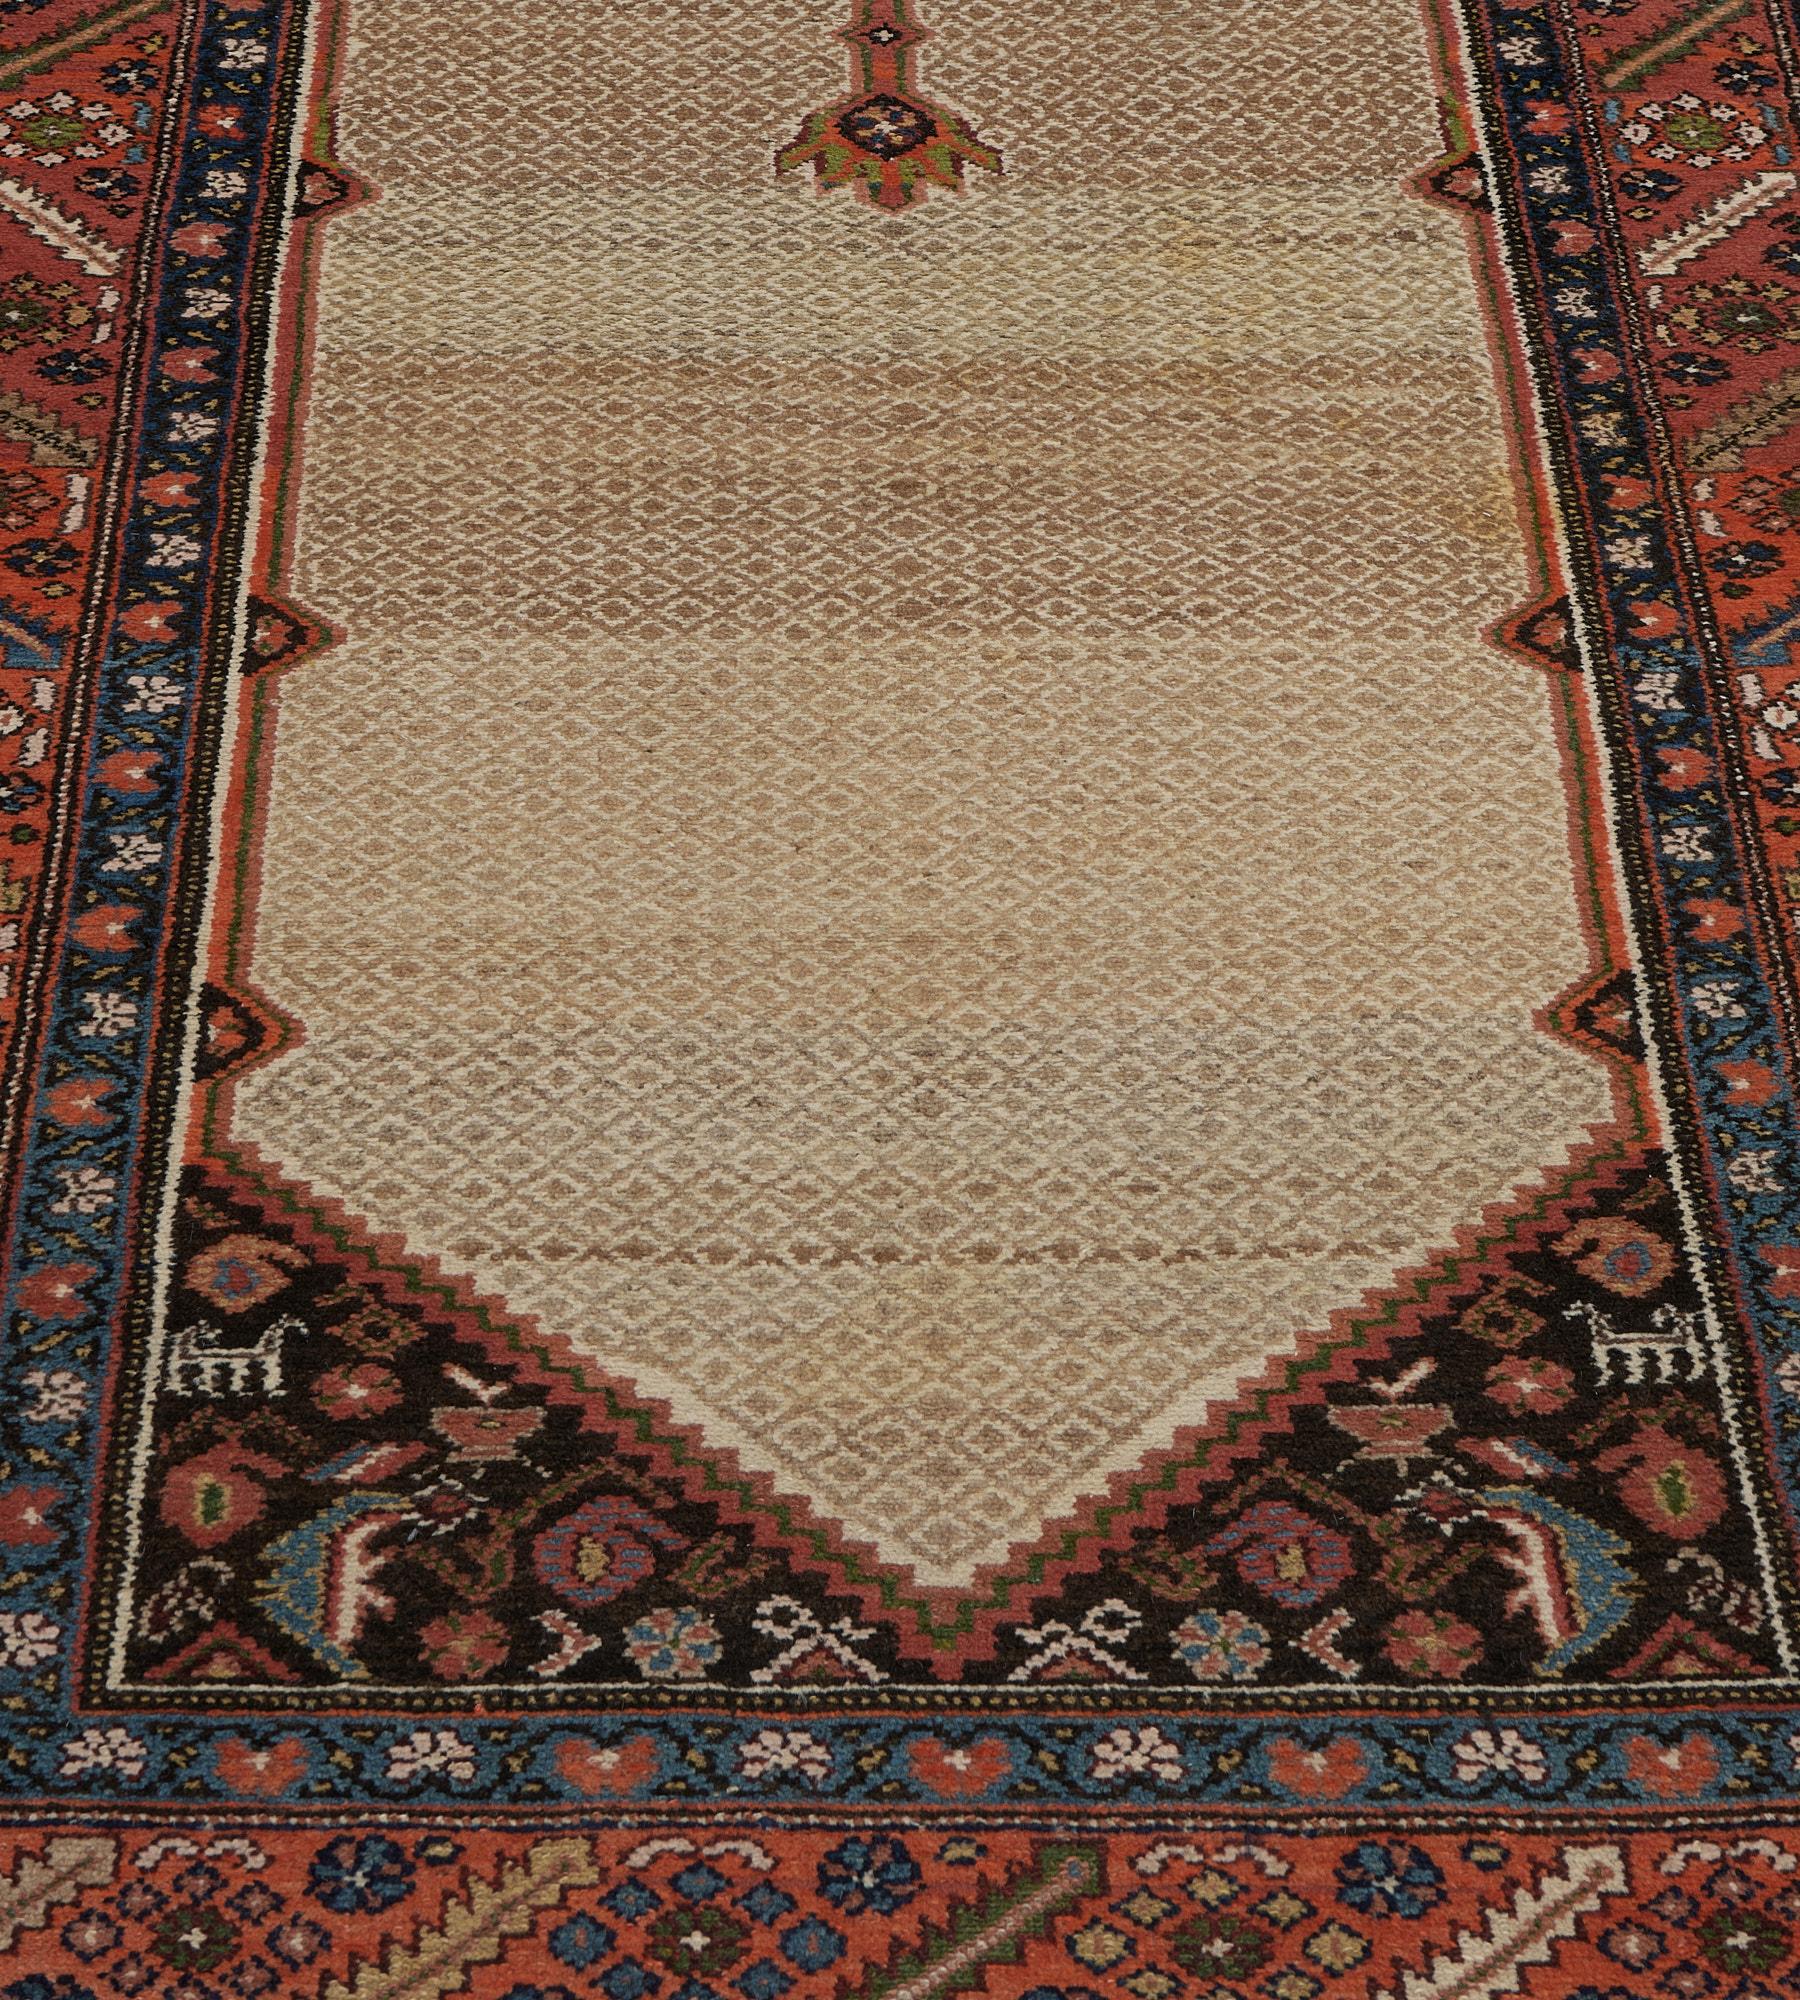 Antique Circa-1900 Wool Persian Serab Runner In Good Condition For Sale In West Hollywood, CA